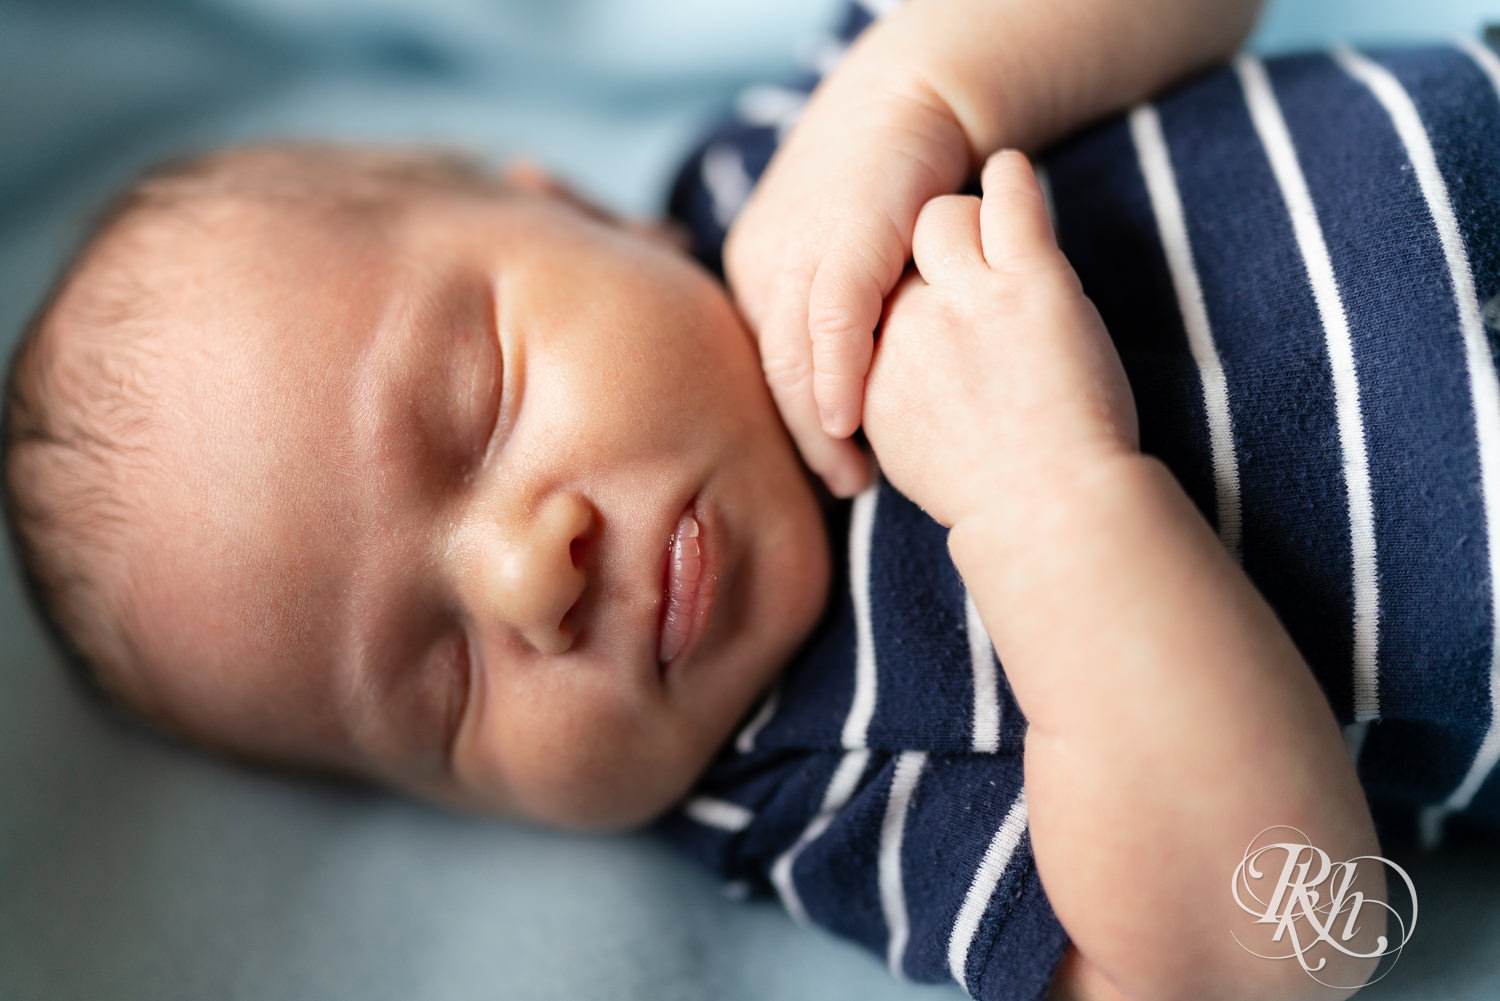 Baby dressed in stripped shirt sleeps during newborn photography session in Ham Lake, Minnesota.